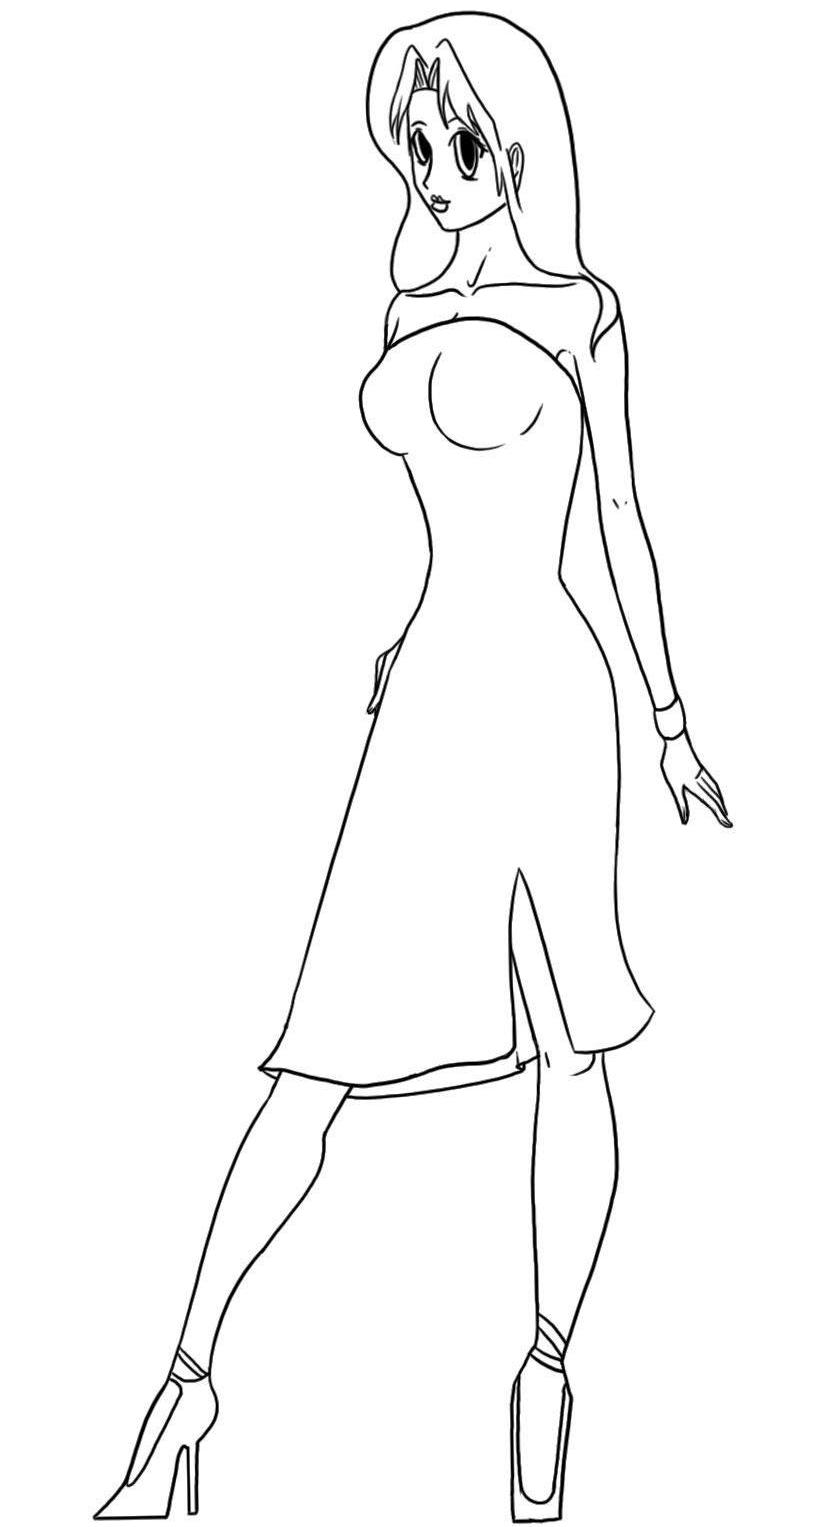 how-to-draw-a-red-dress-anime-model-step-6_1_000000004478_5